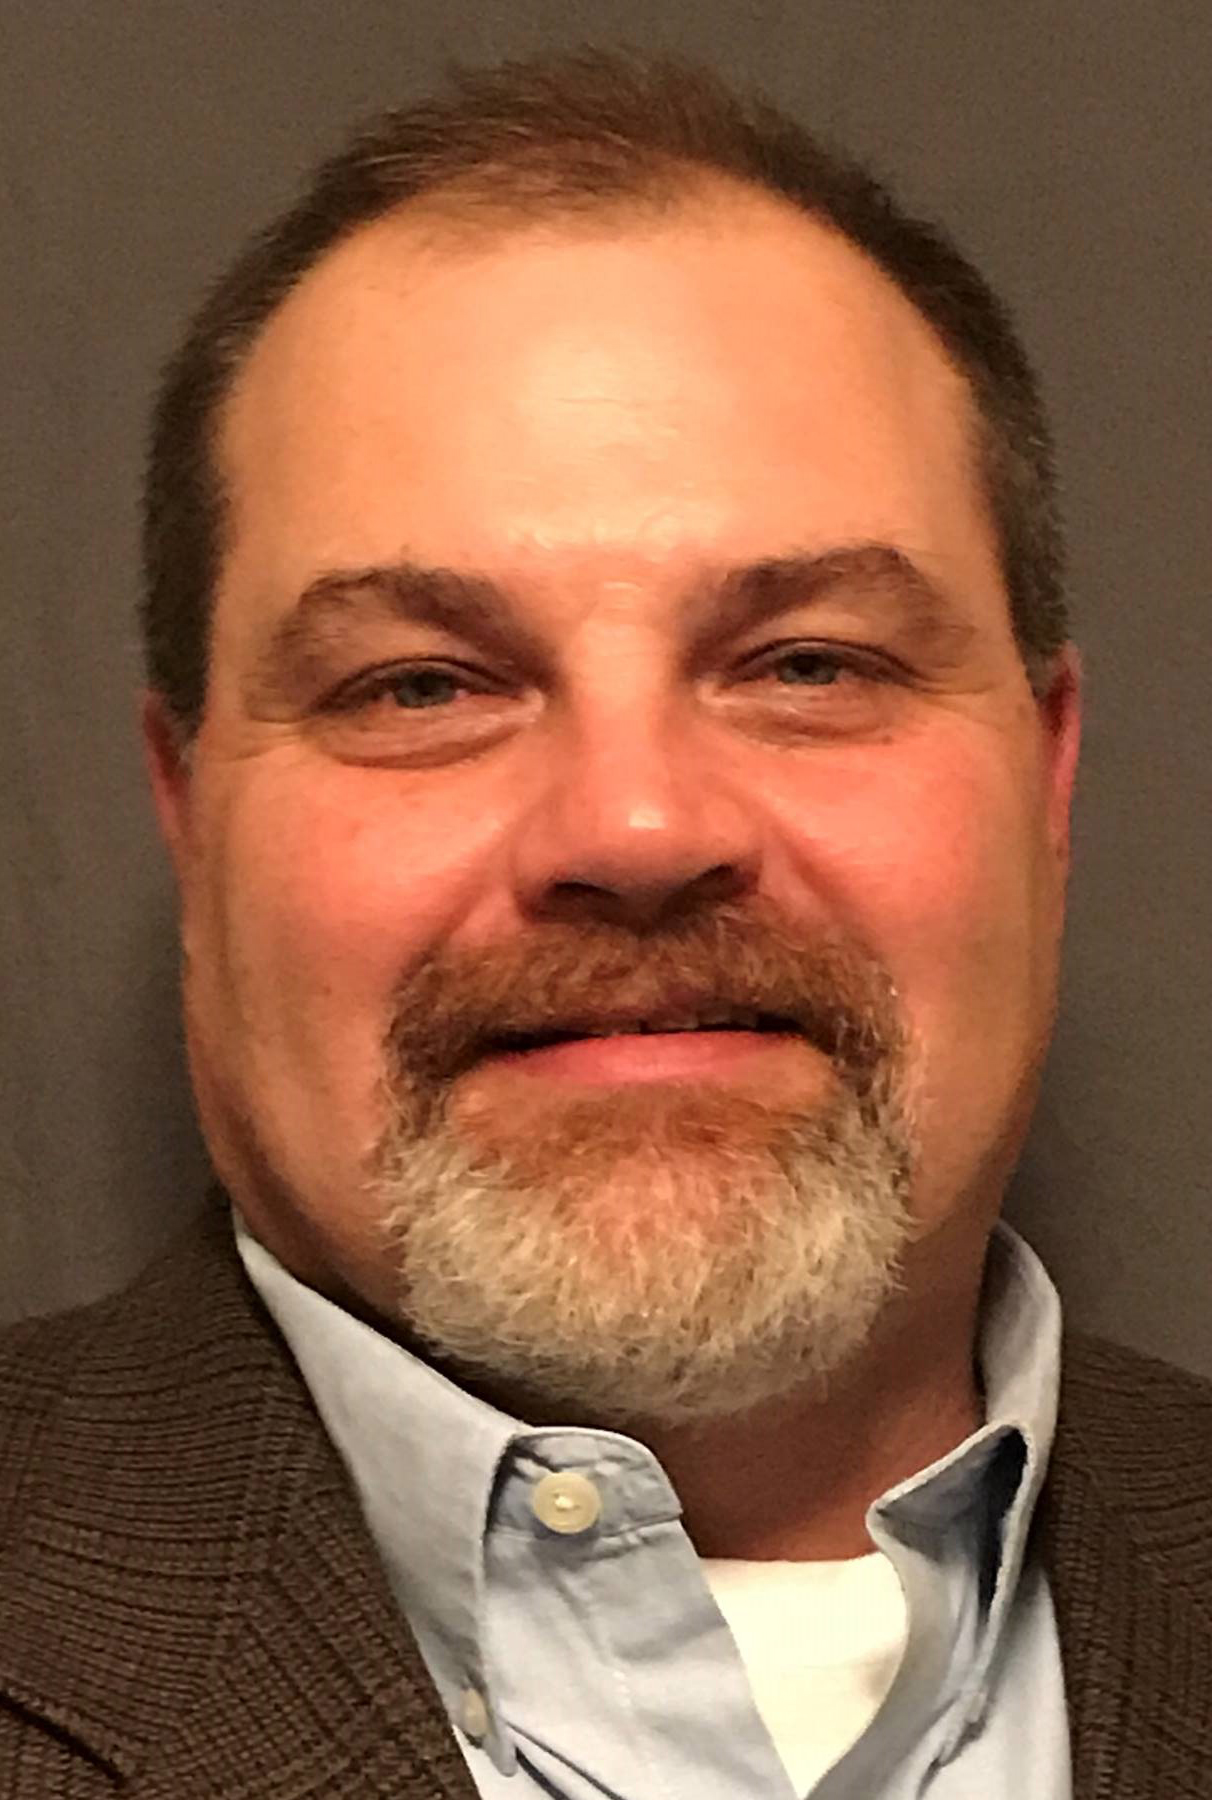 Company with Trussville roots hires new state operations manager